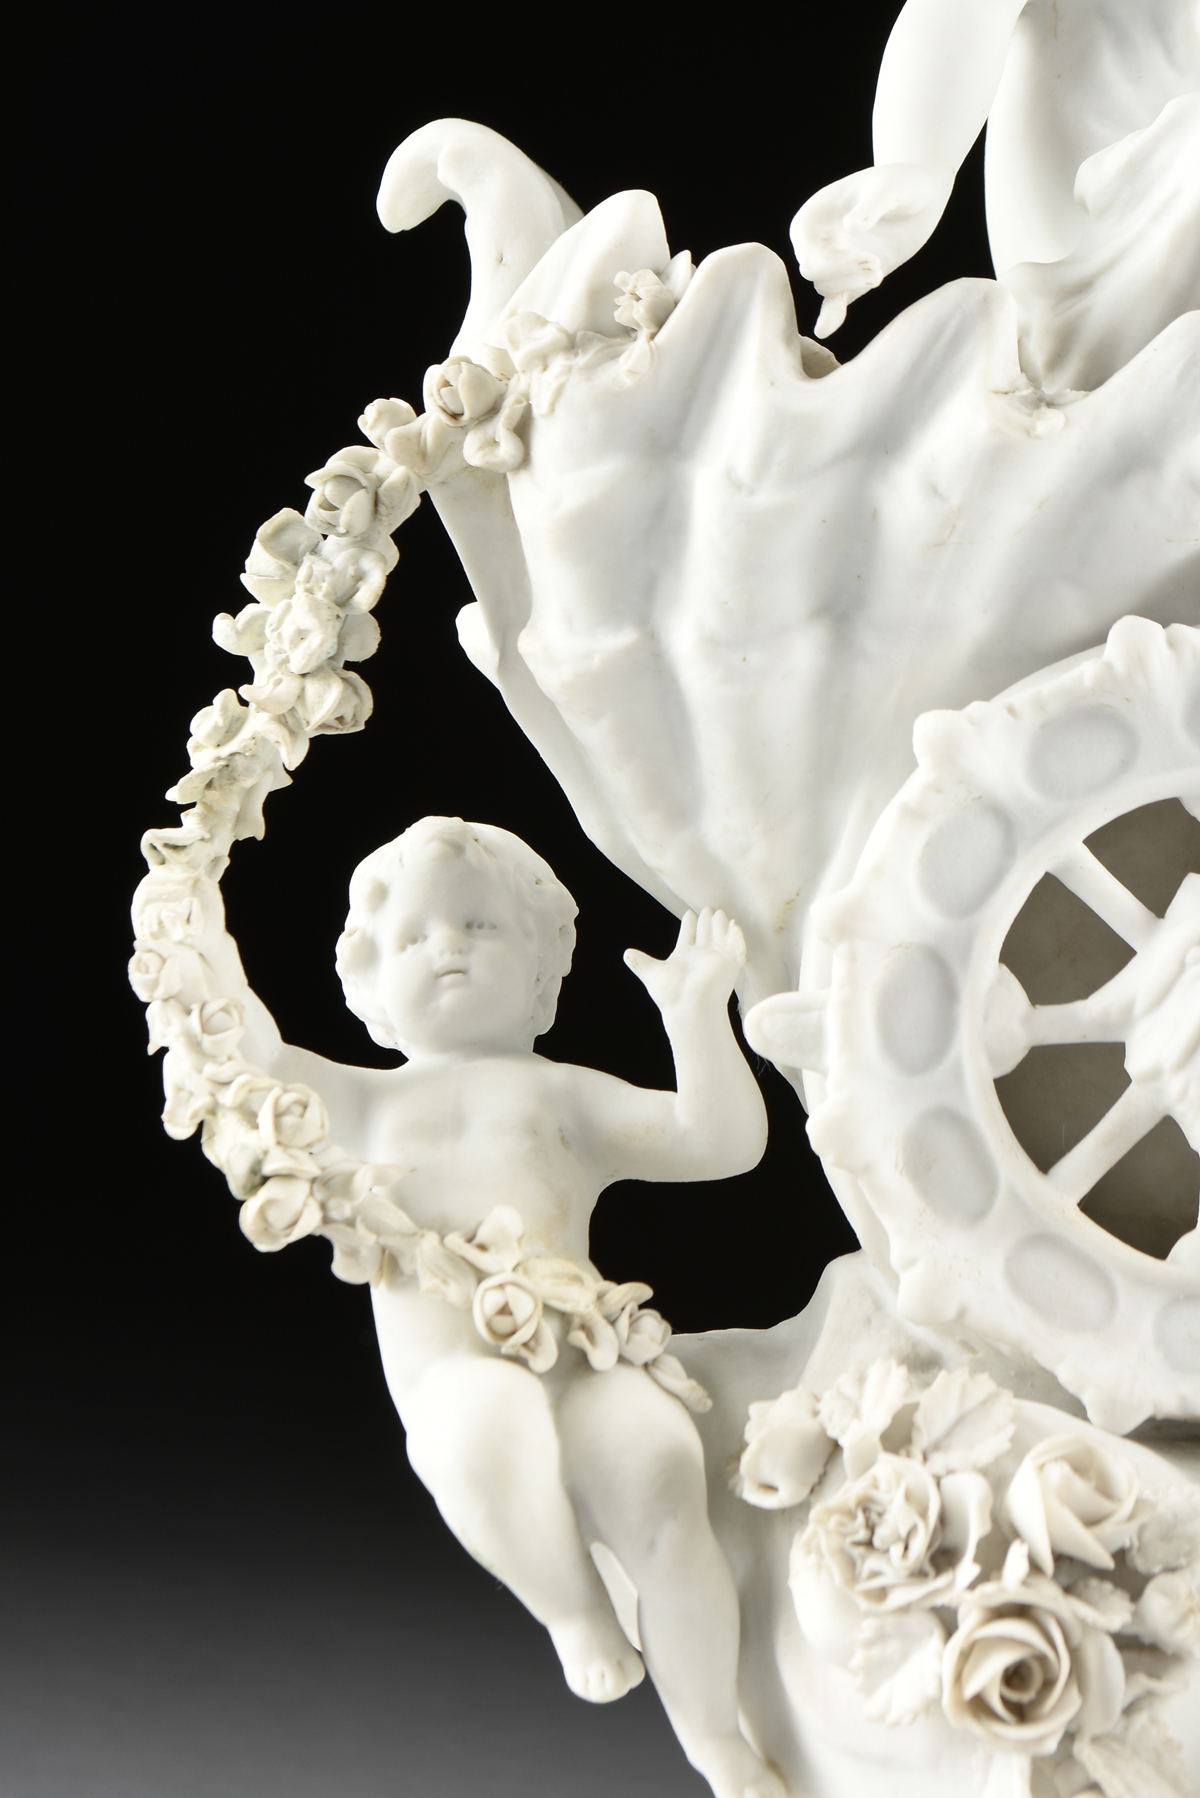 A BAROQUE REVIVAL BISQUE PORCELAIN FIGURAL GROUPING, "Allegory of Spring," POSSIBLY GERMAN, LATE - Image 3 of 11